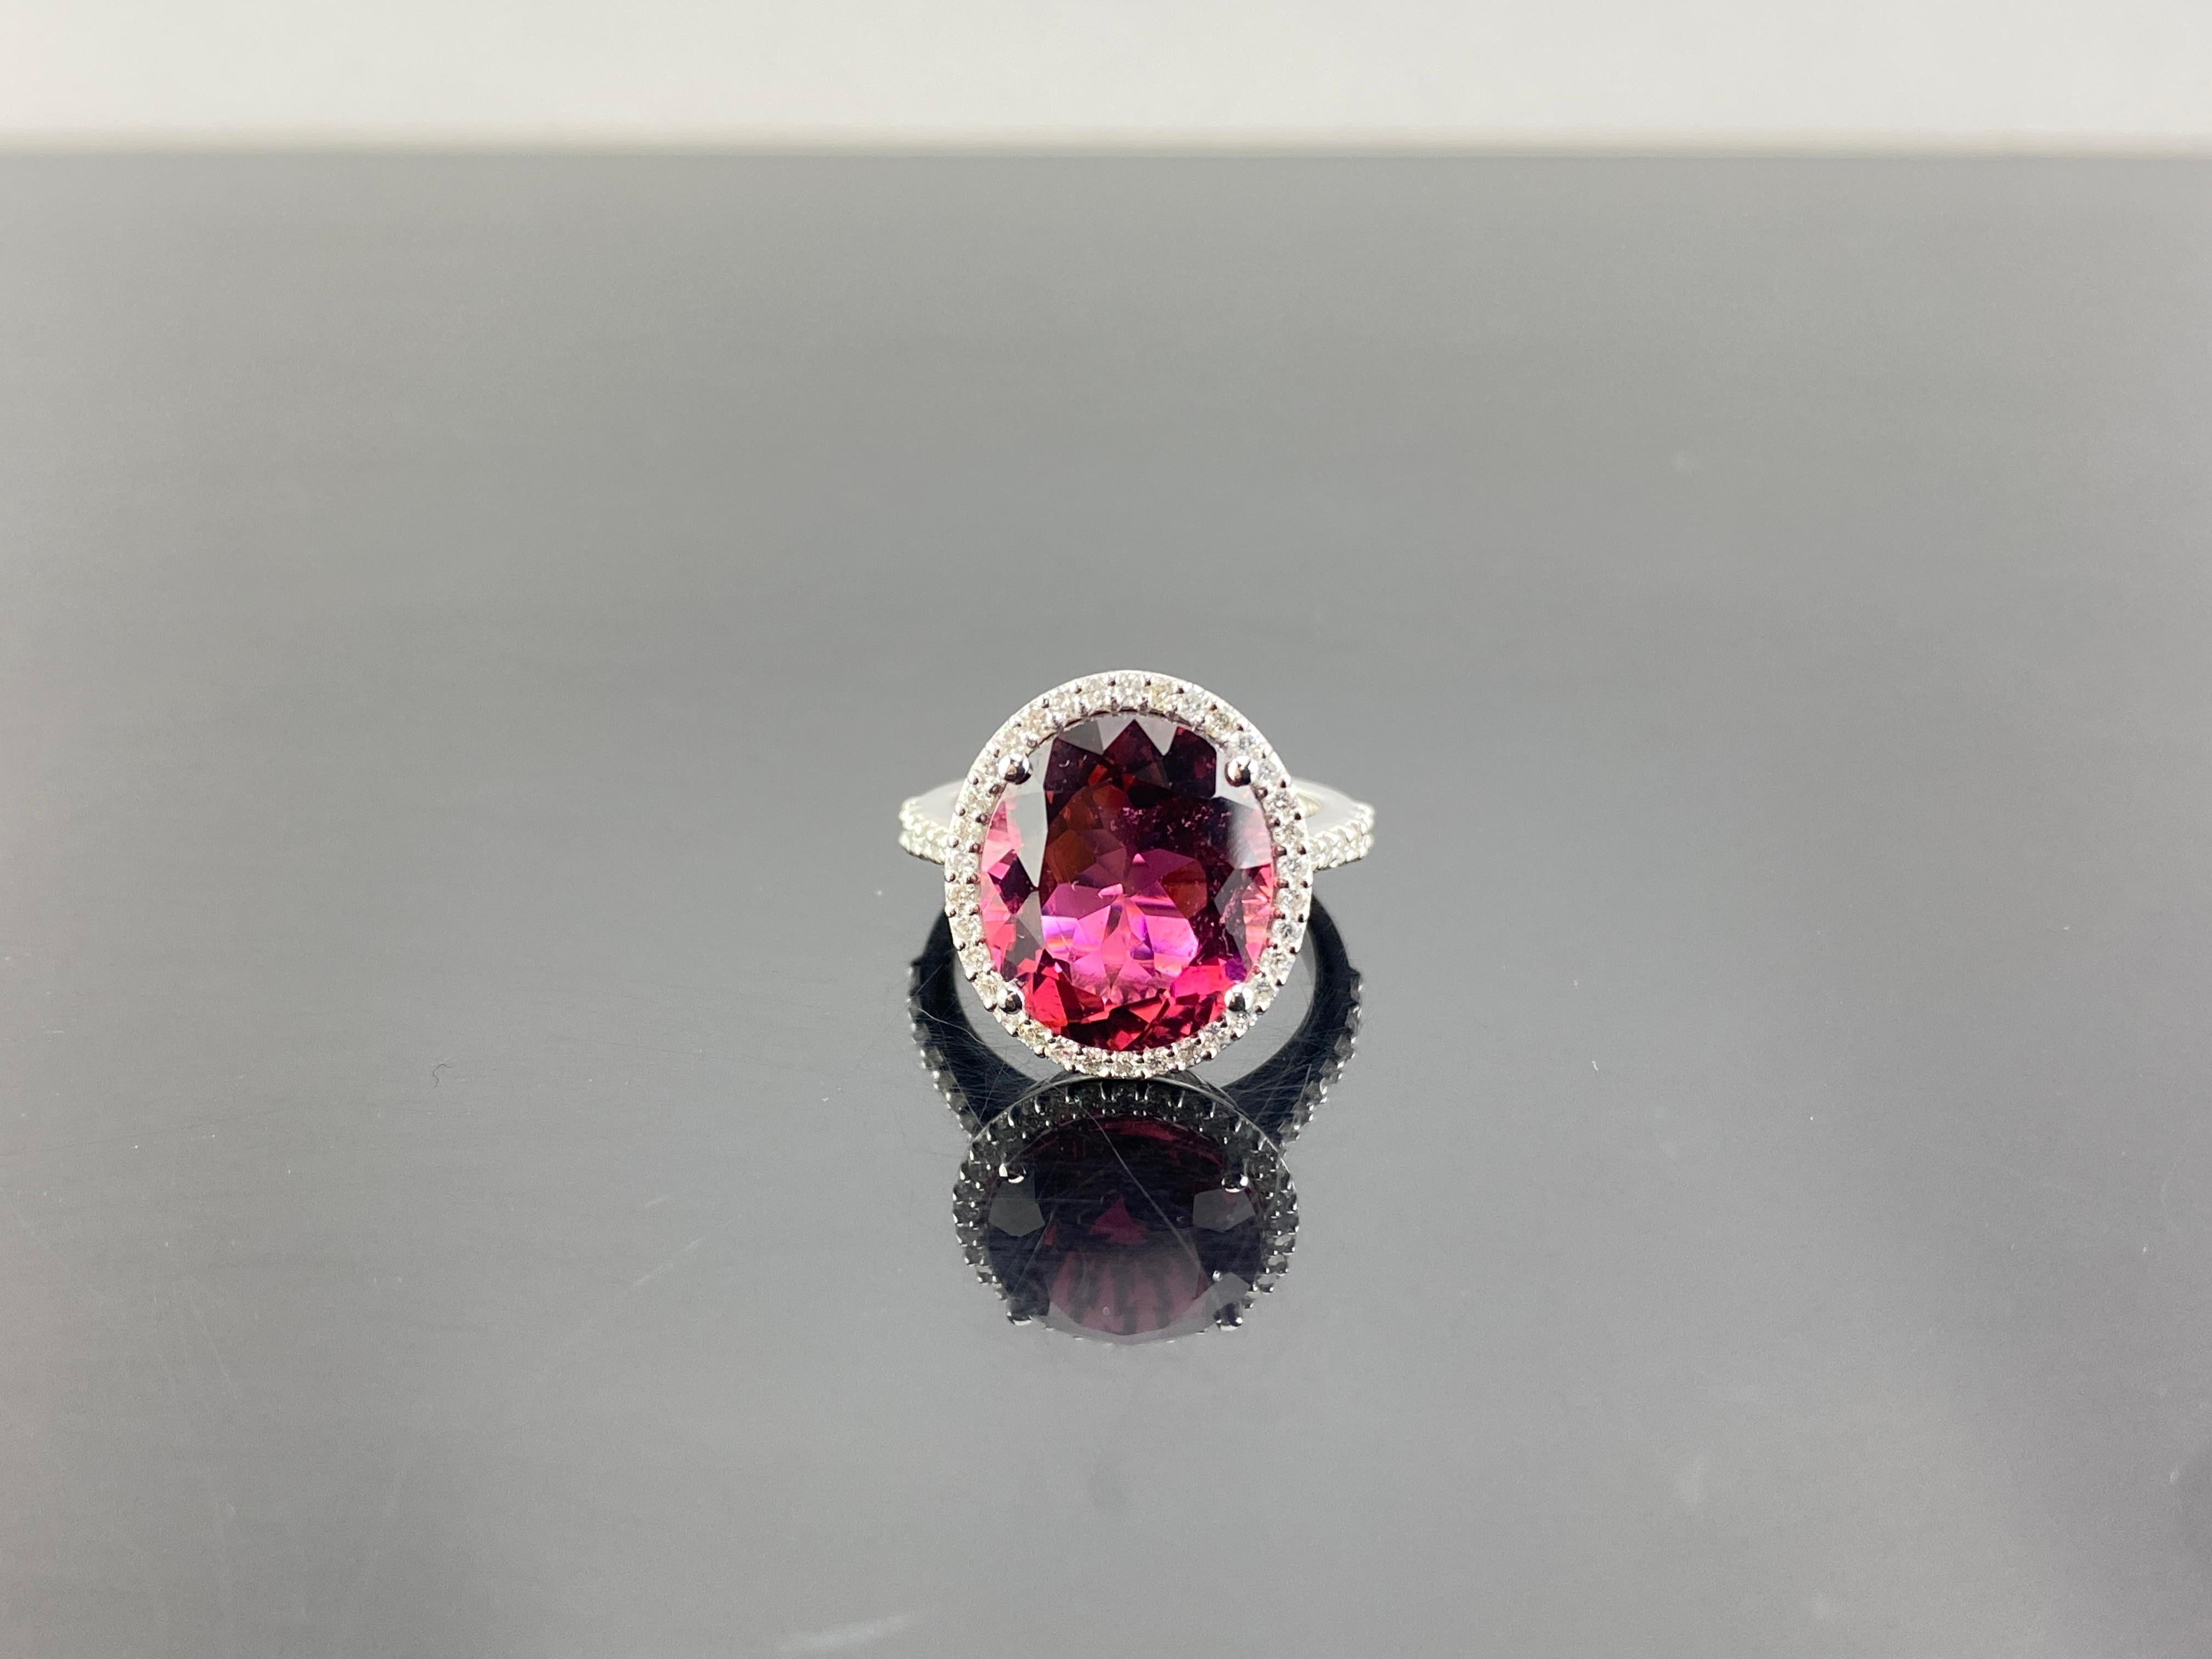 With its striking symmetry and enchanting hue, our 7.87 carat Rubelite is a masterpiece of nature. With a rich, beautifully saturated pink color and exquisite transparency, this incredible rarity is showcased in a classic setting, surrounded by 0.57